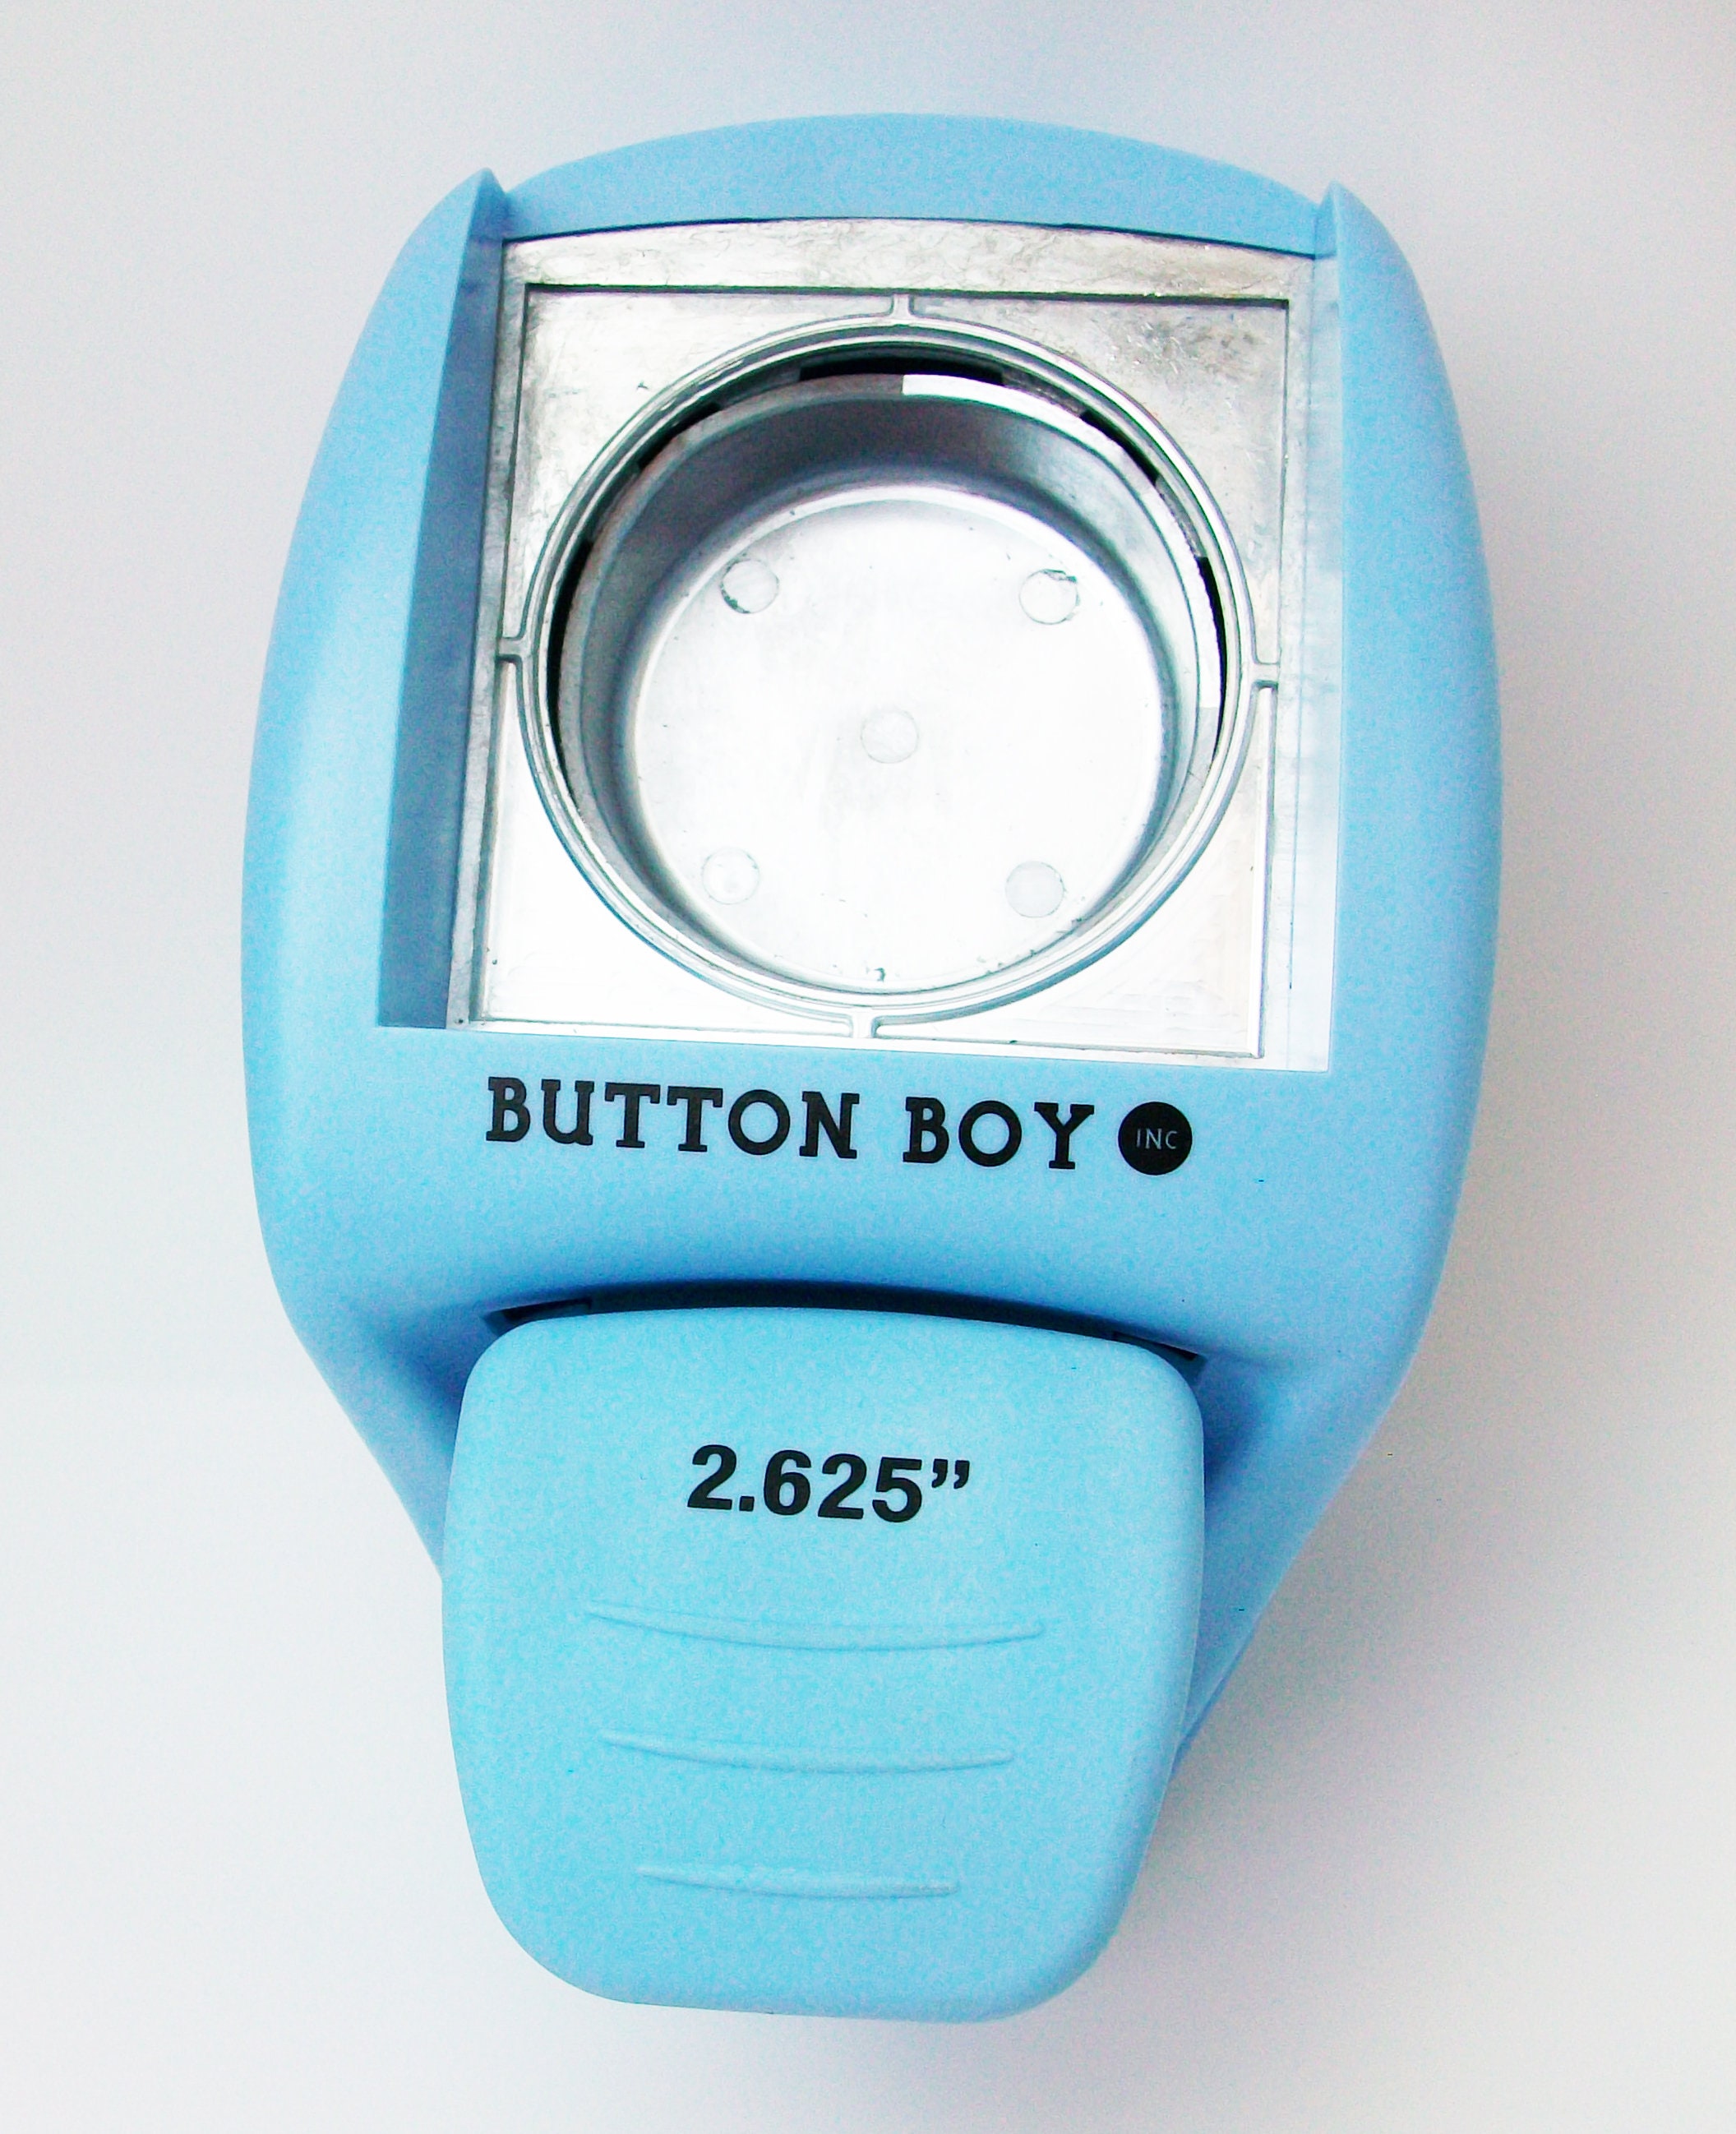 2.25 B.A.M. Size Tecre Graphic Punch for 2-3/8 Size Buttons (B.A.M. 2-1/4  Size) Model #2750 -FREE SHIPPING - Button Boy